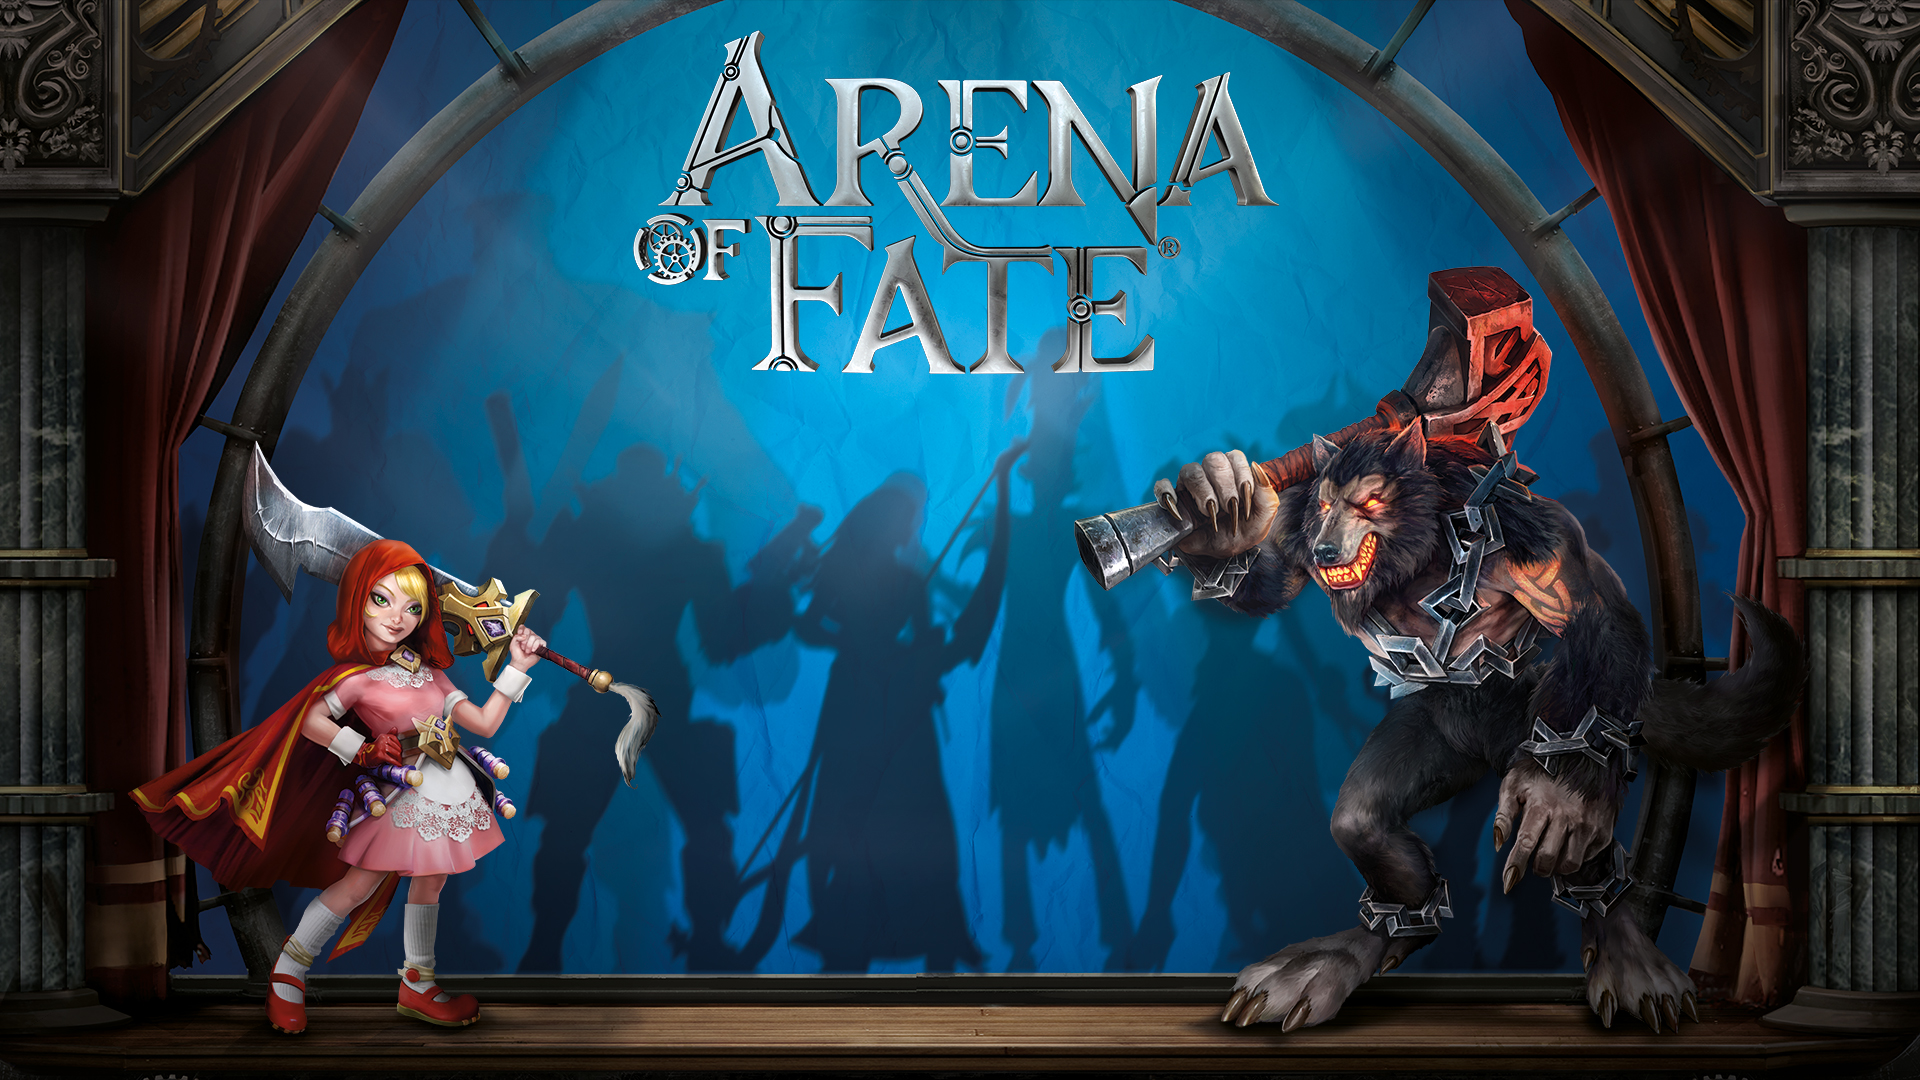 Order of fate. Арена фэнтези. Arena of Fate games. Arena of Fate коды. Ultimate Arena of Fate персонажи.